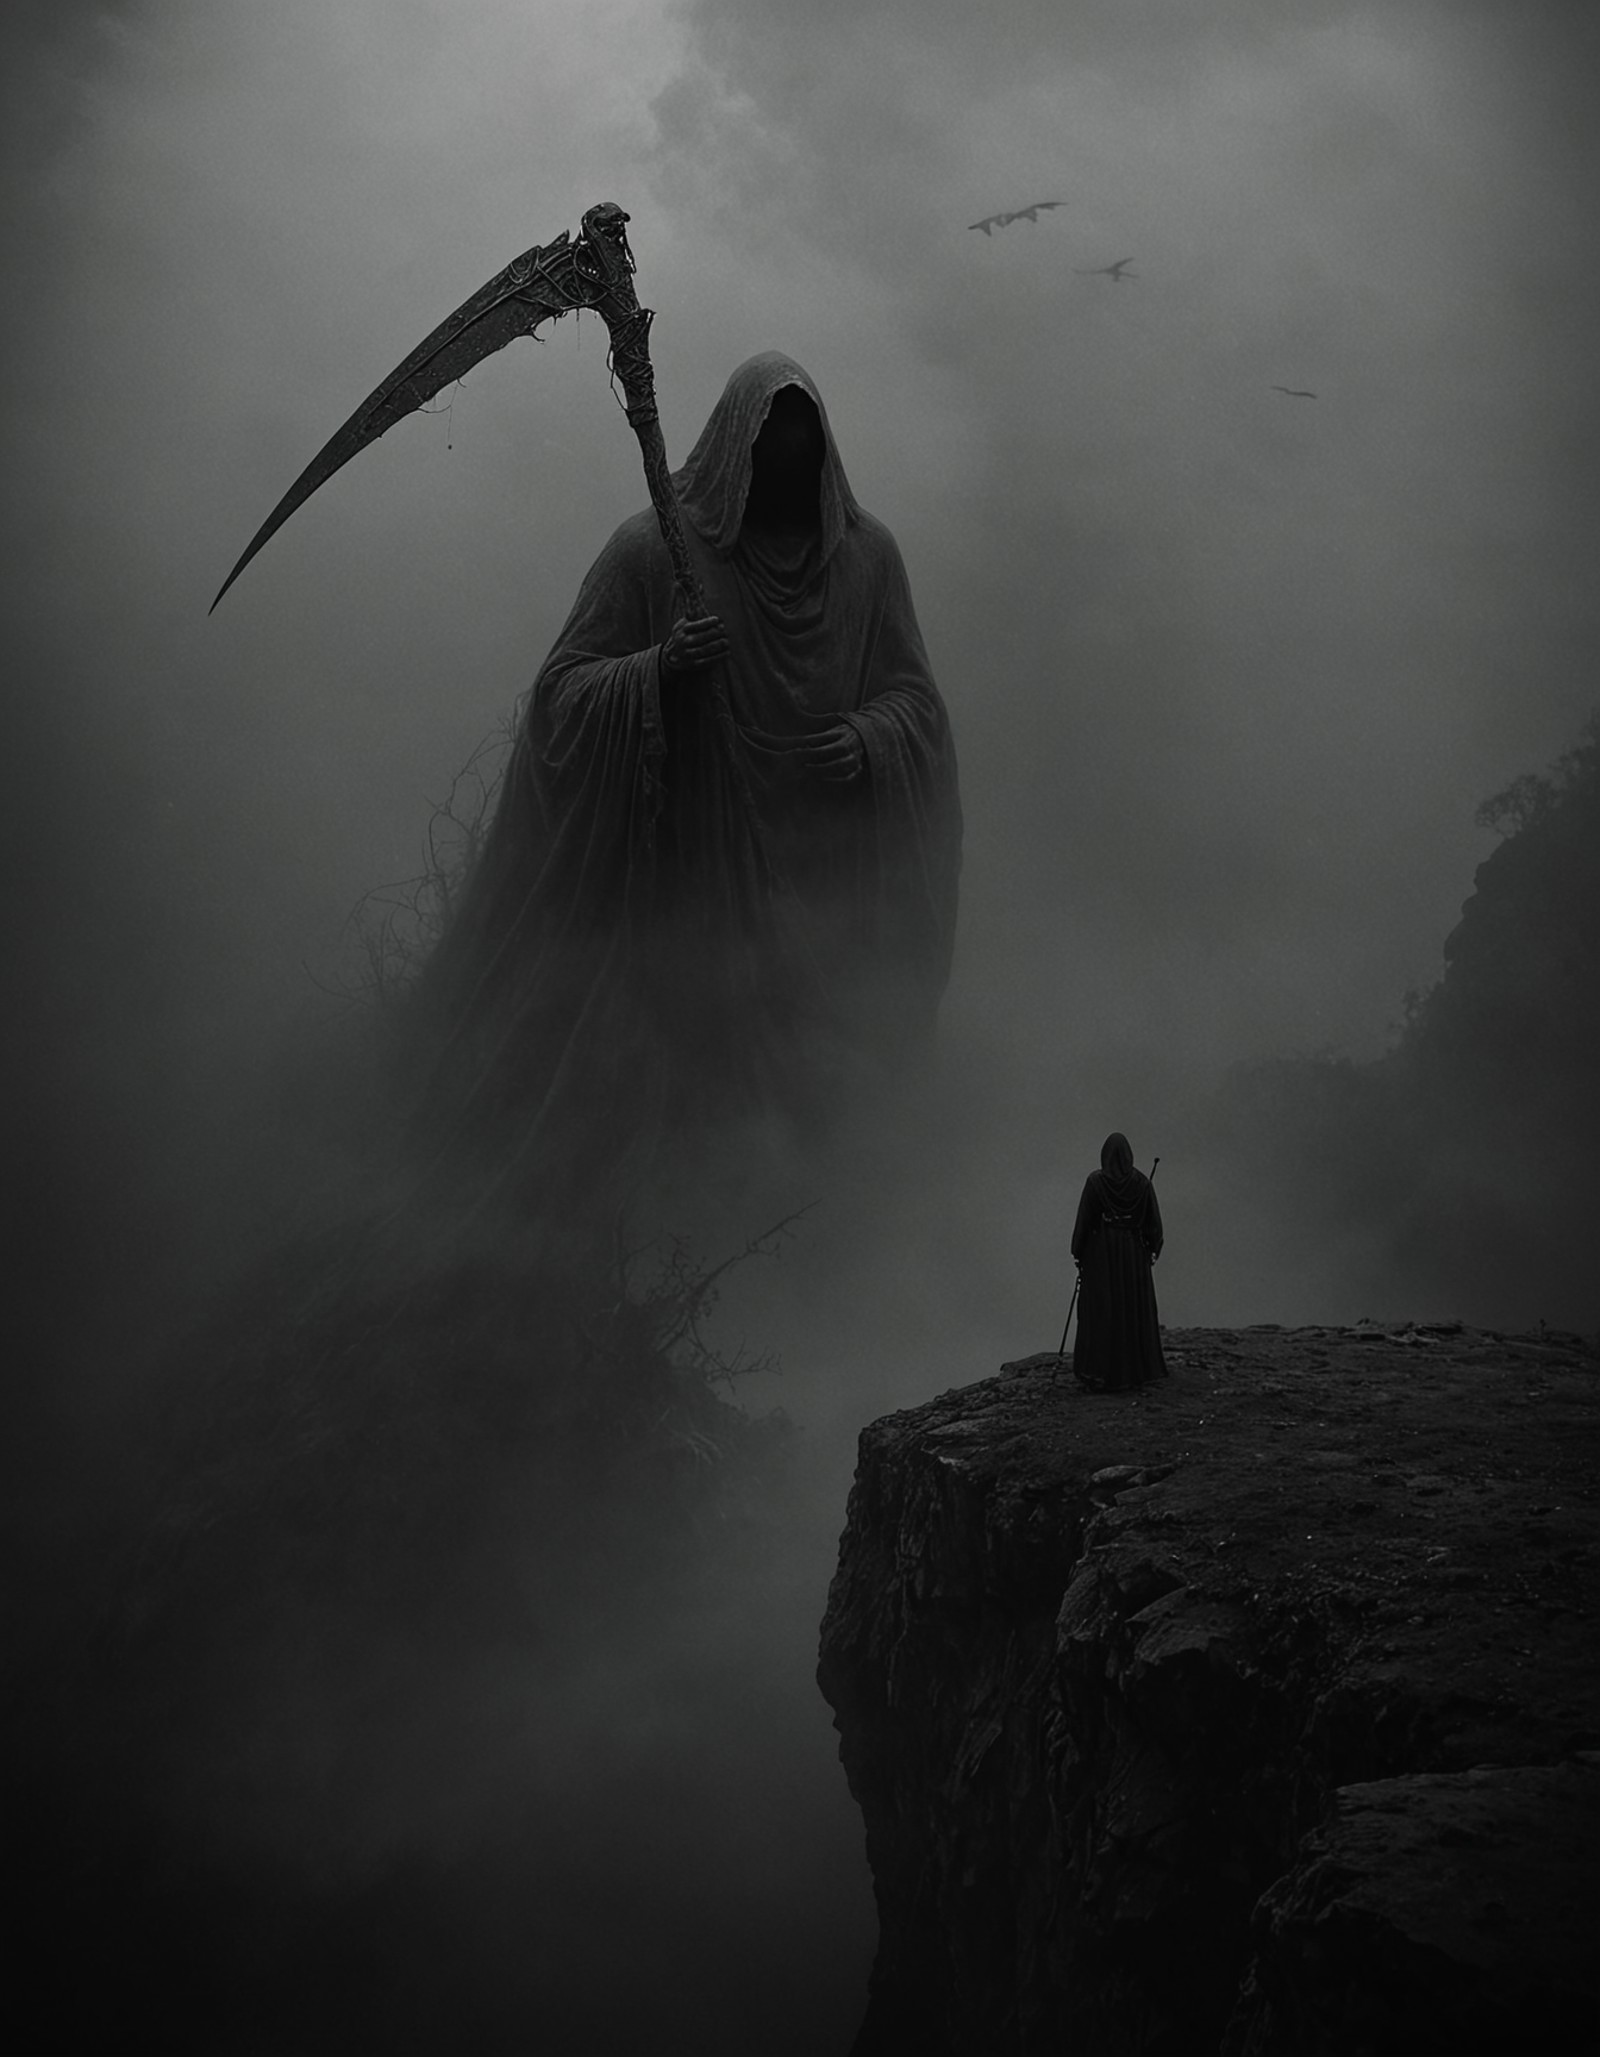 A large, cloaked figure wielding a scythe, gliding through a misty, mountainous landscape. Facing the figure is a much smaller cloaked figure on a rocky outcrop. The atmosphere is dark and ominous, with fog swirling around, adding to the foreboding mood.